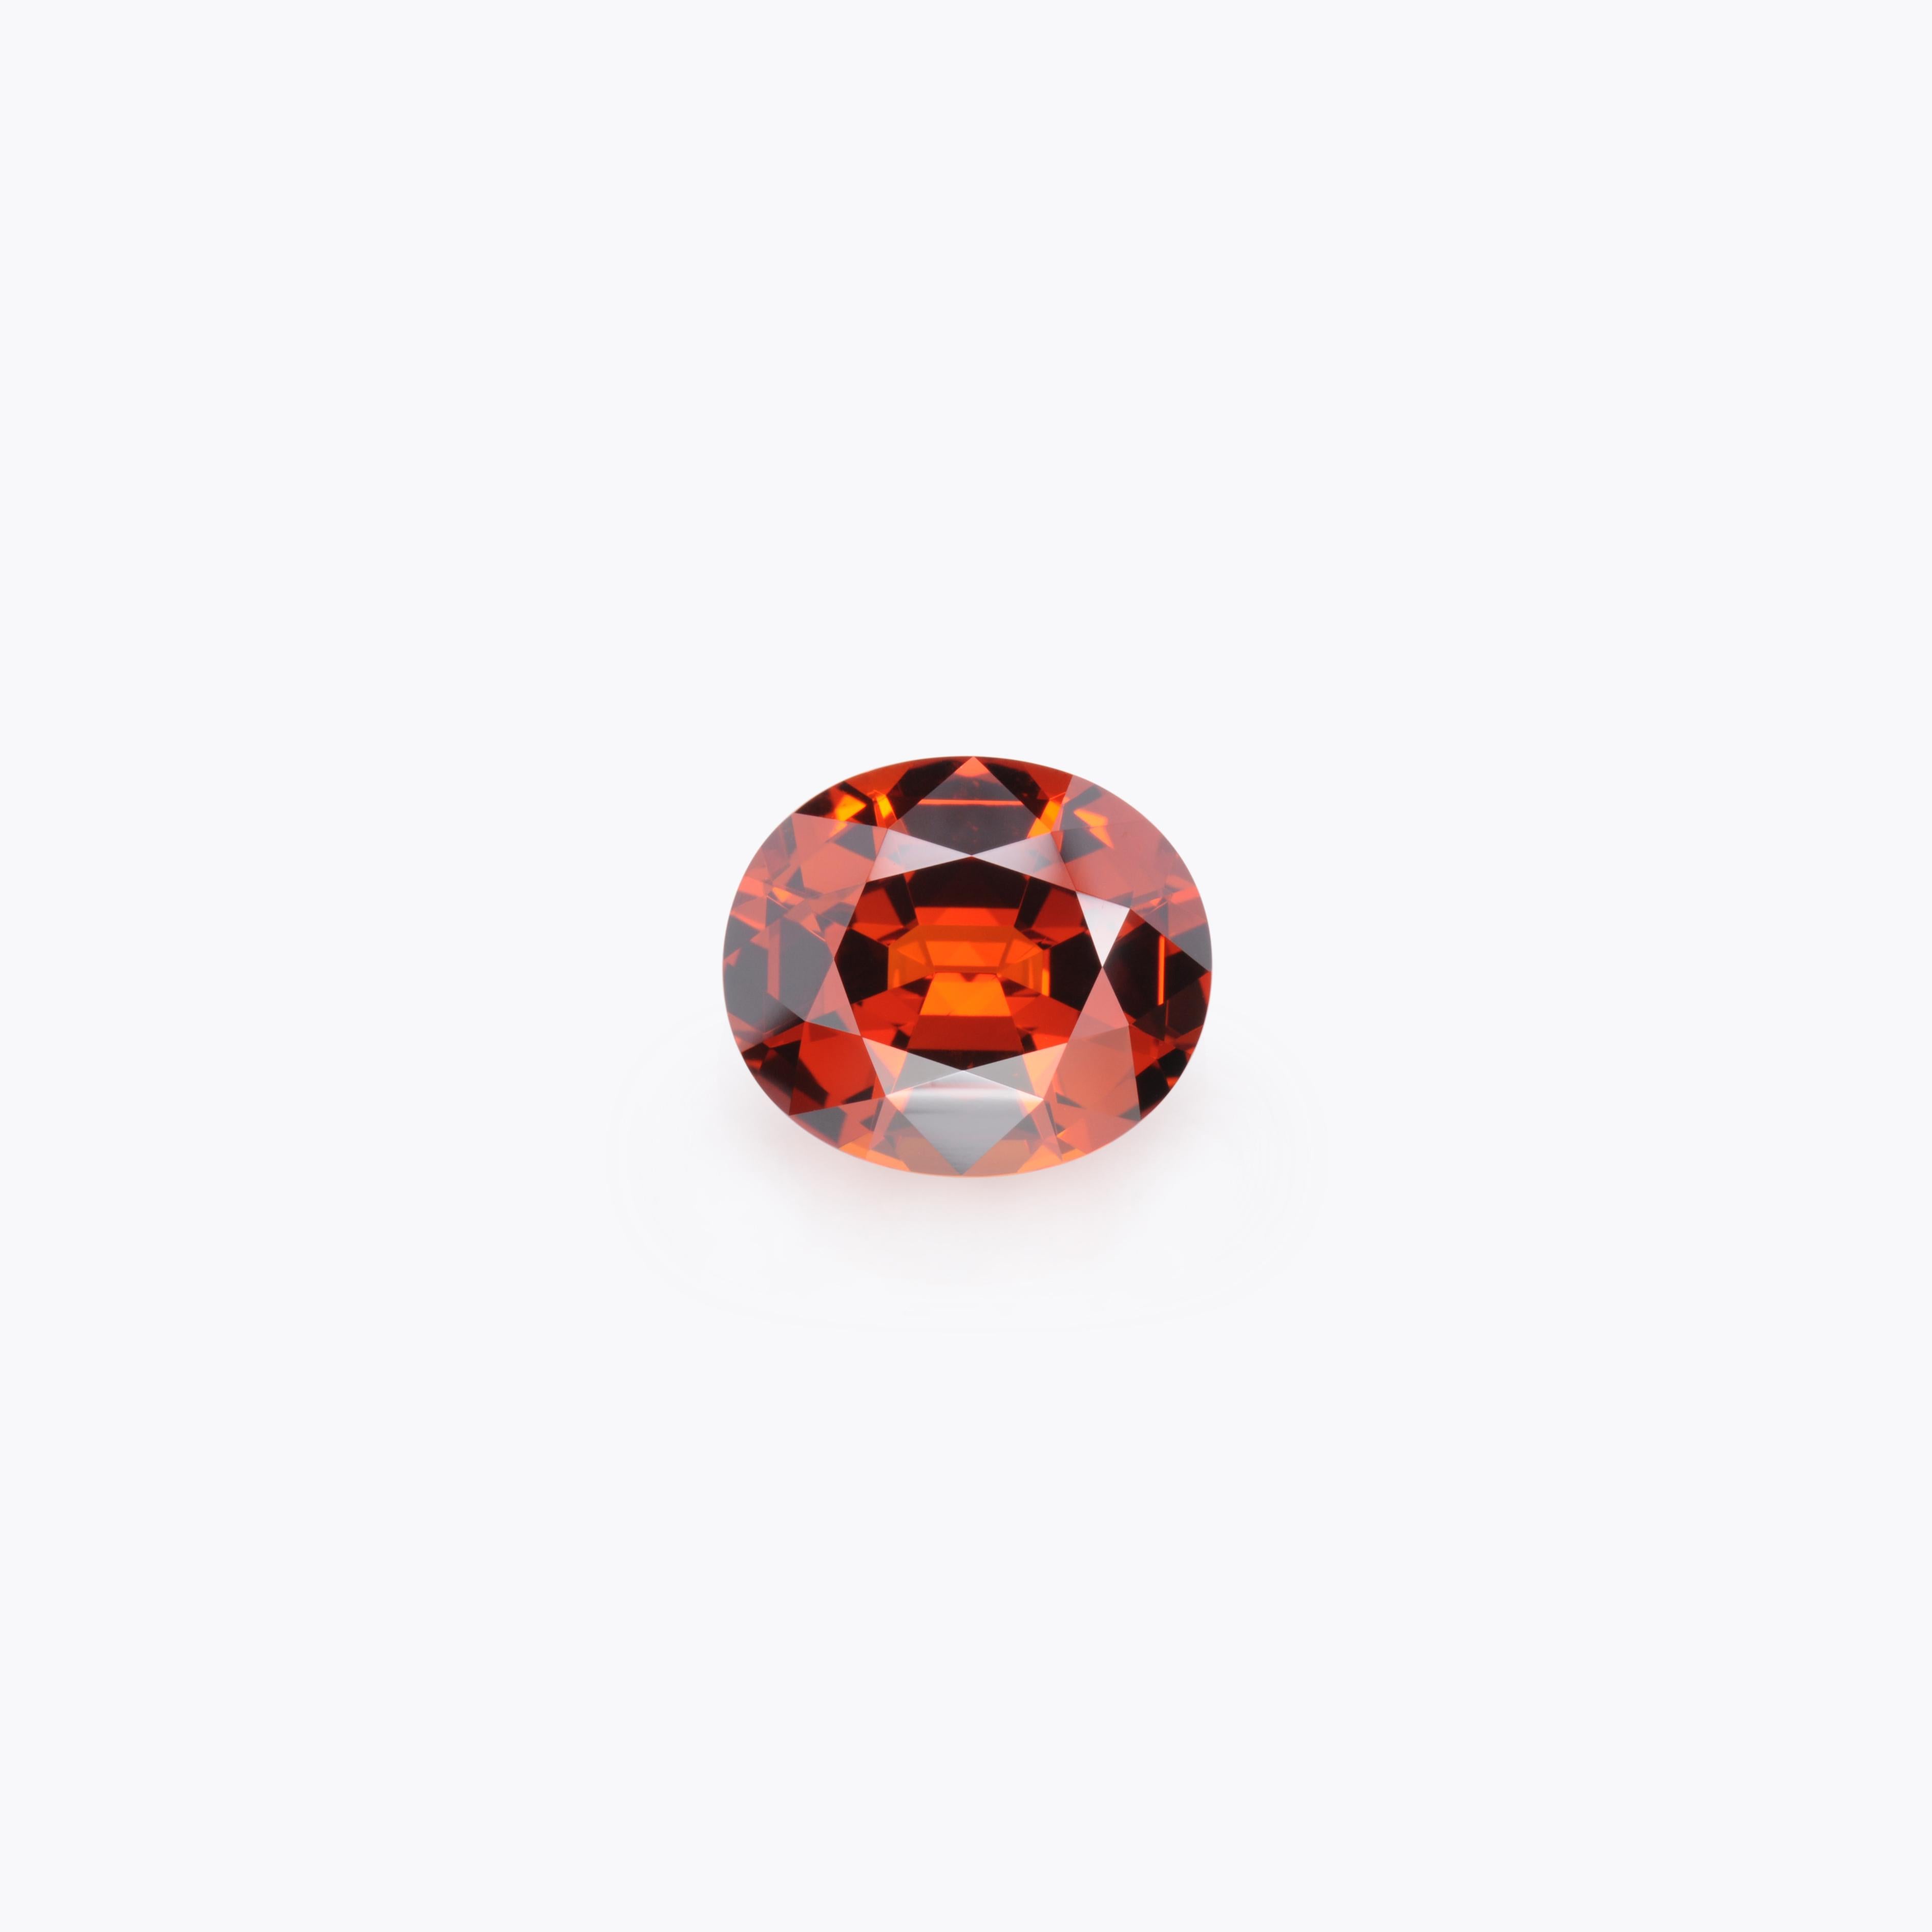 Bright 11.09 carat Spessartite Garnet (Mandarin Garnet) oval gem, offered loose to a fine gemstone connoisseur.
Dimensions: 14.40 x 12.20 x 7.50 mm
Returns are accepted and paid by us within 7 days of delivery.
We offer supreme custom jewelry work